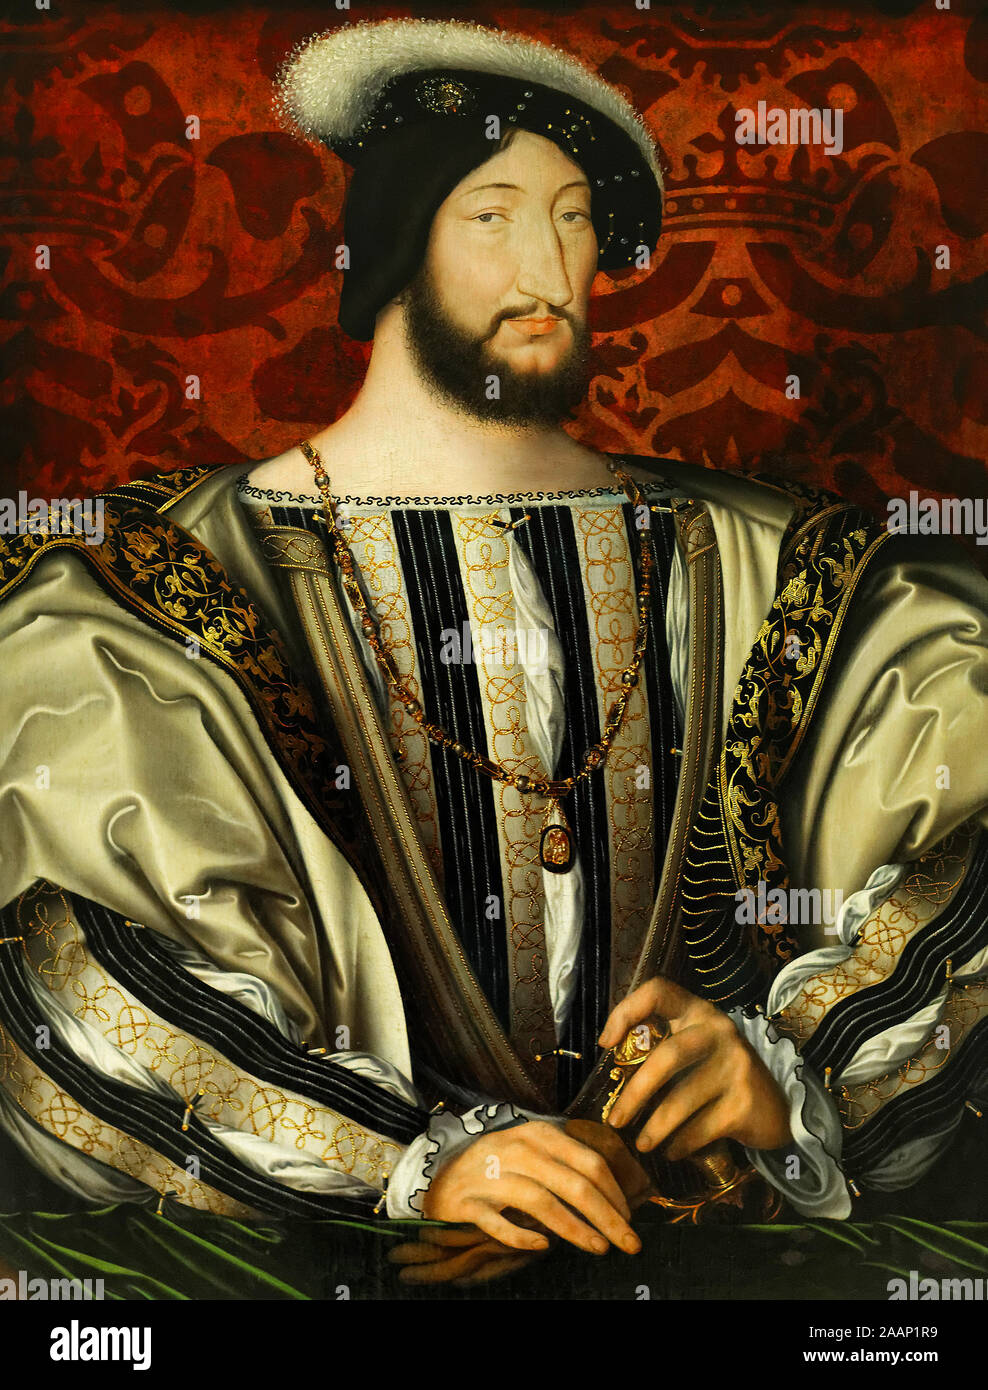 A portrait of Francis I (1494-1547) by painted by Jean Clouet, King of France from 1515 until his death in 1547.  A prodigious patron of the arts, he initiated the French Renaissance by attracting many Italian artists to work on the Château de Chambord, including Leonardo da Vinci, who brought the Mona Lisa with him, which Francis  acquired. His reign saw important cultural changes with the rise of absolute monarchy in France, the spread of humanism and Protestantism, and the beginning of French exploration of the New World. Stock Photo